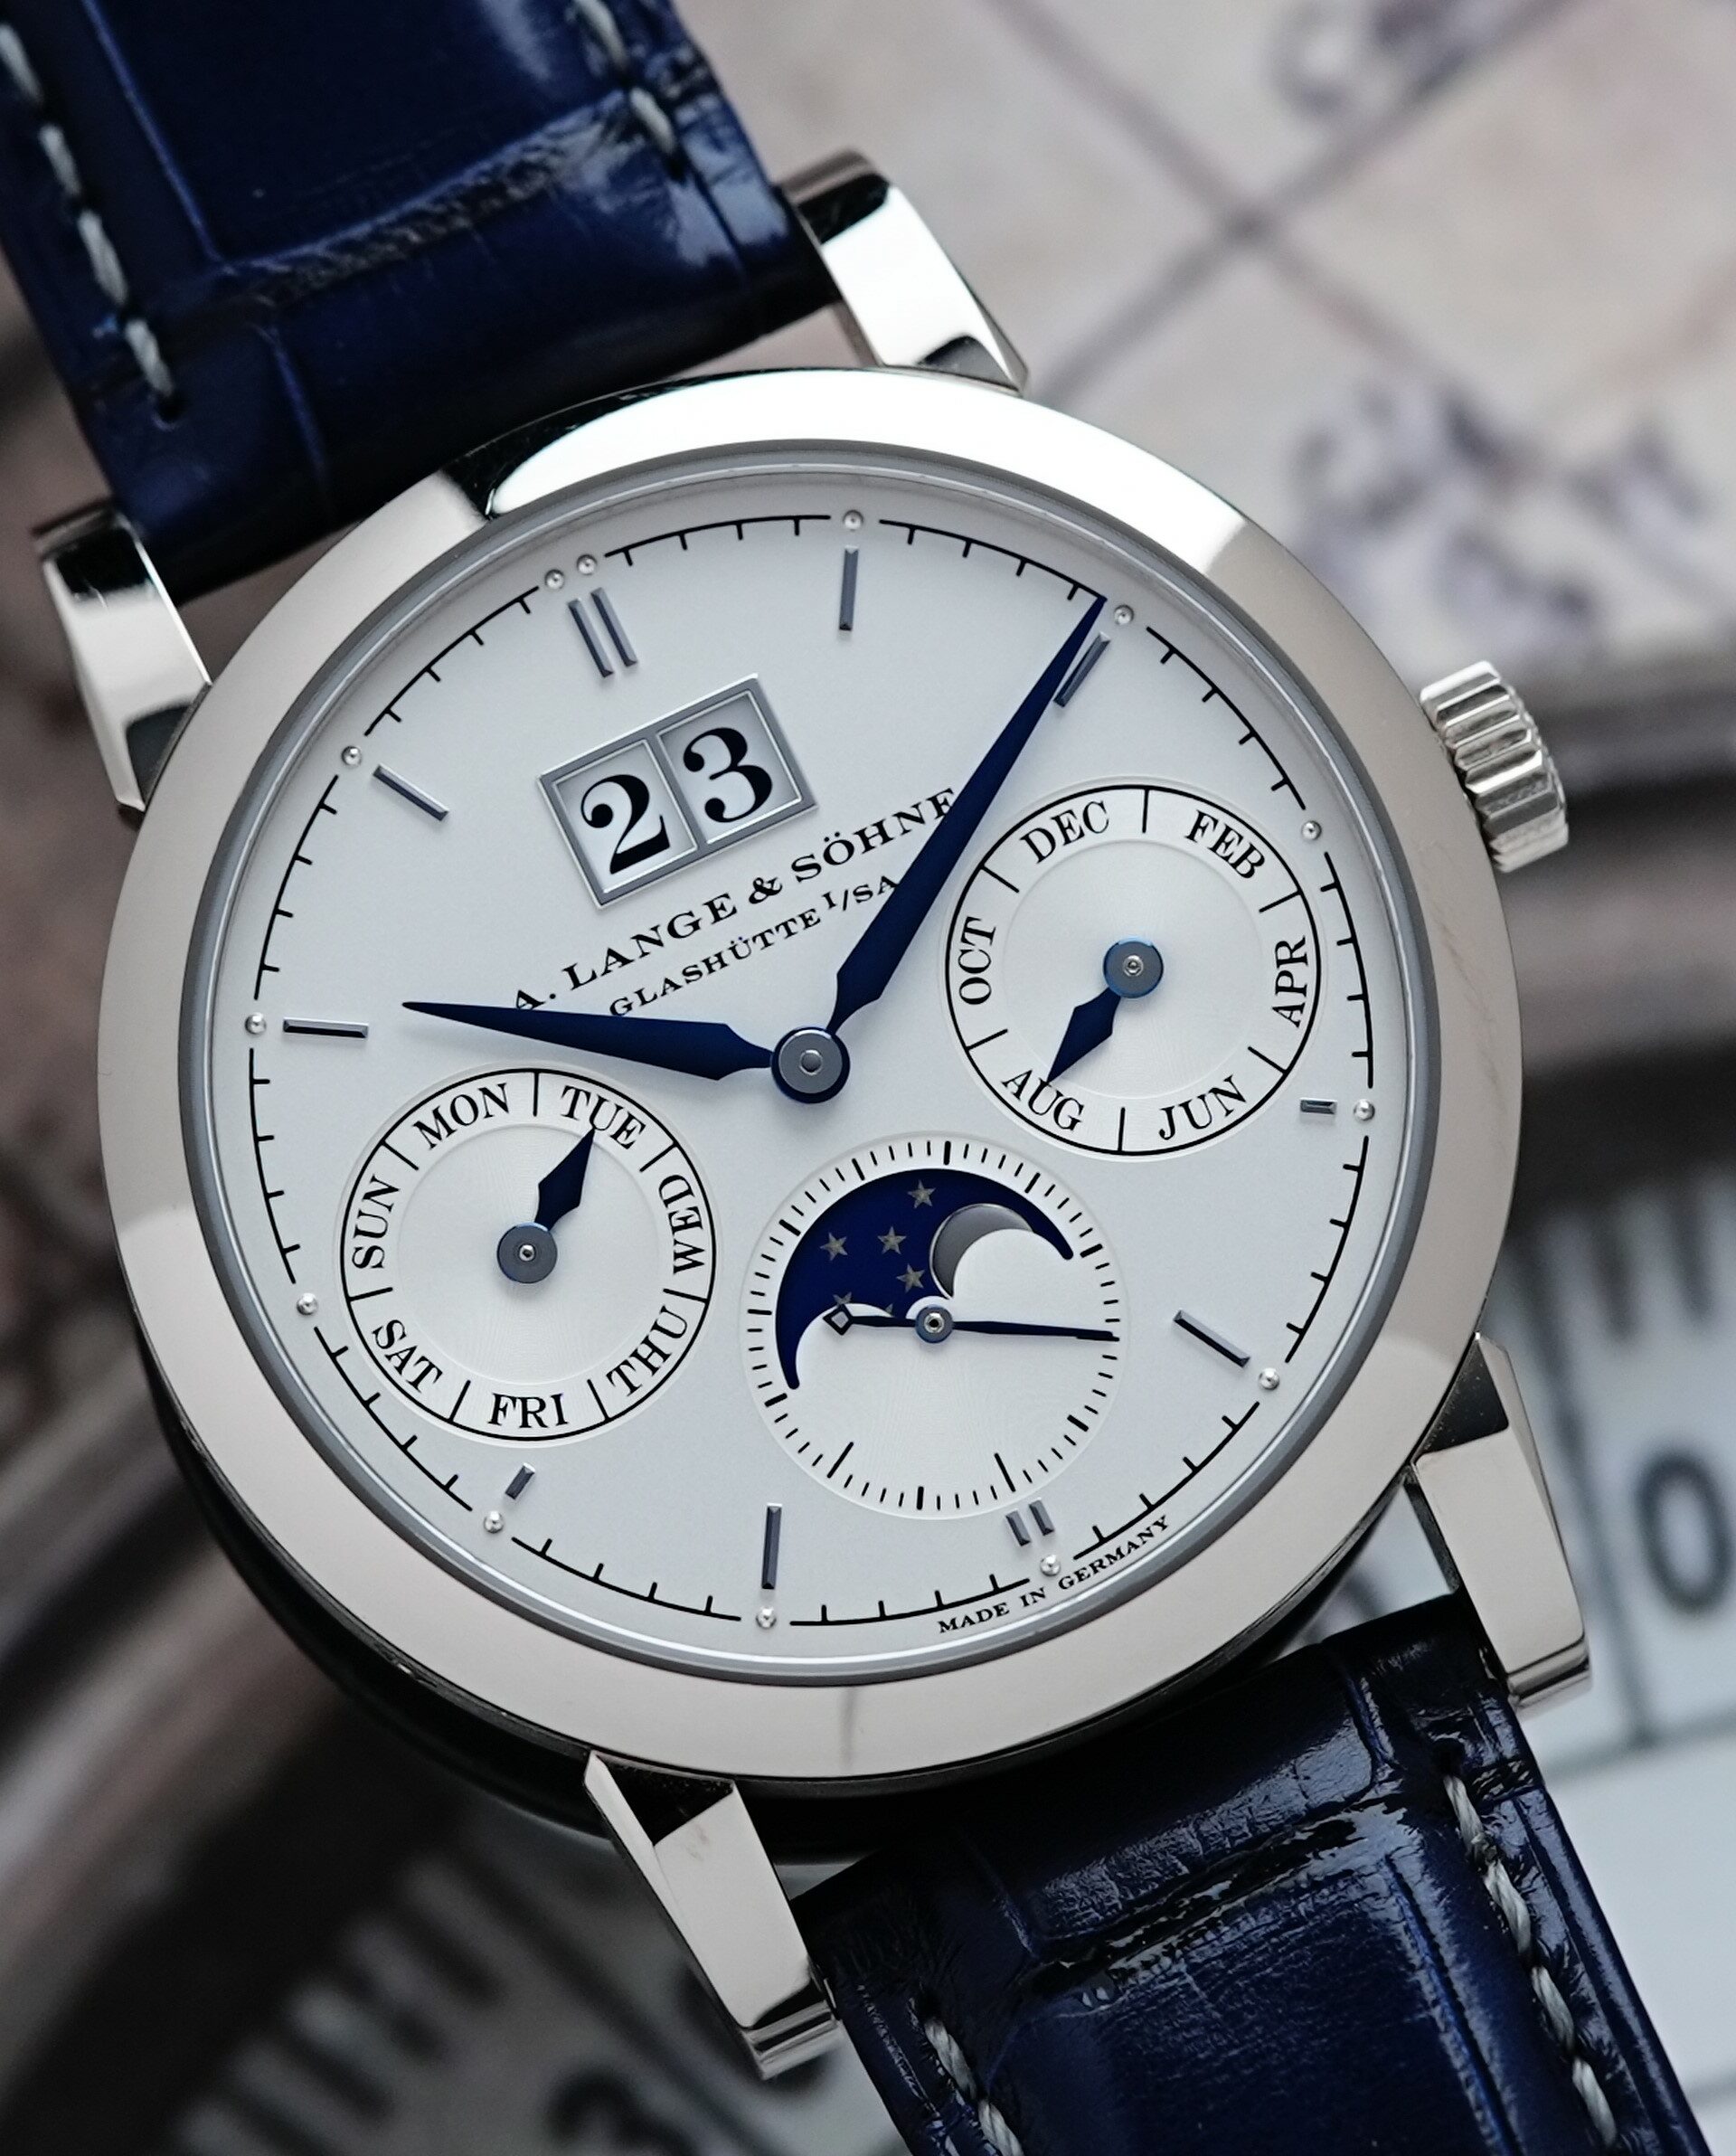 Side angle image of the A. Lange & Söhne Saxonia Annual Calendar watch.